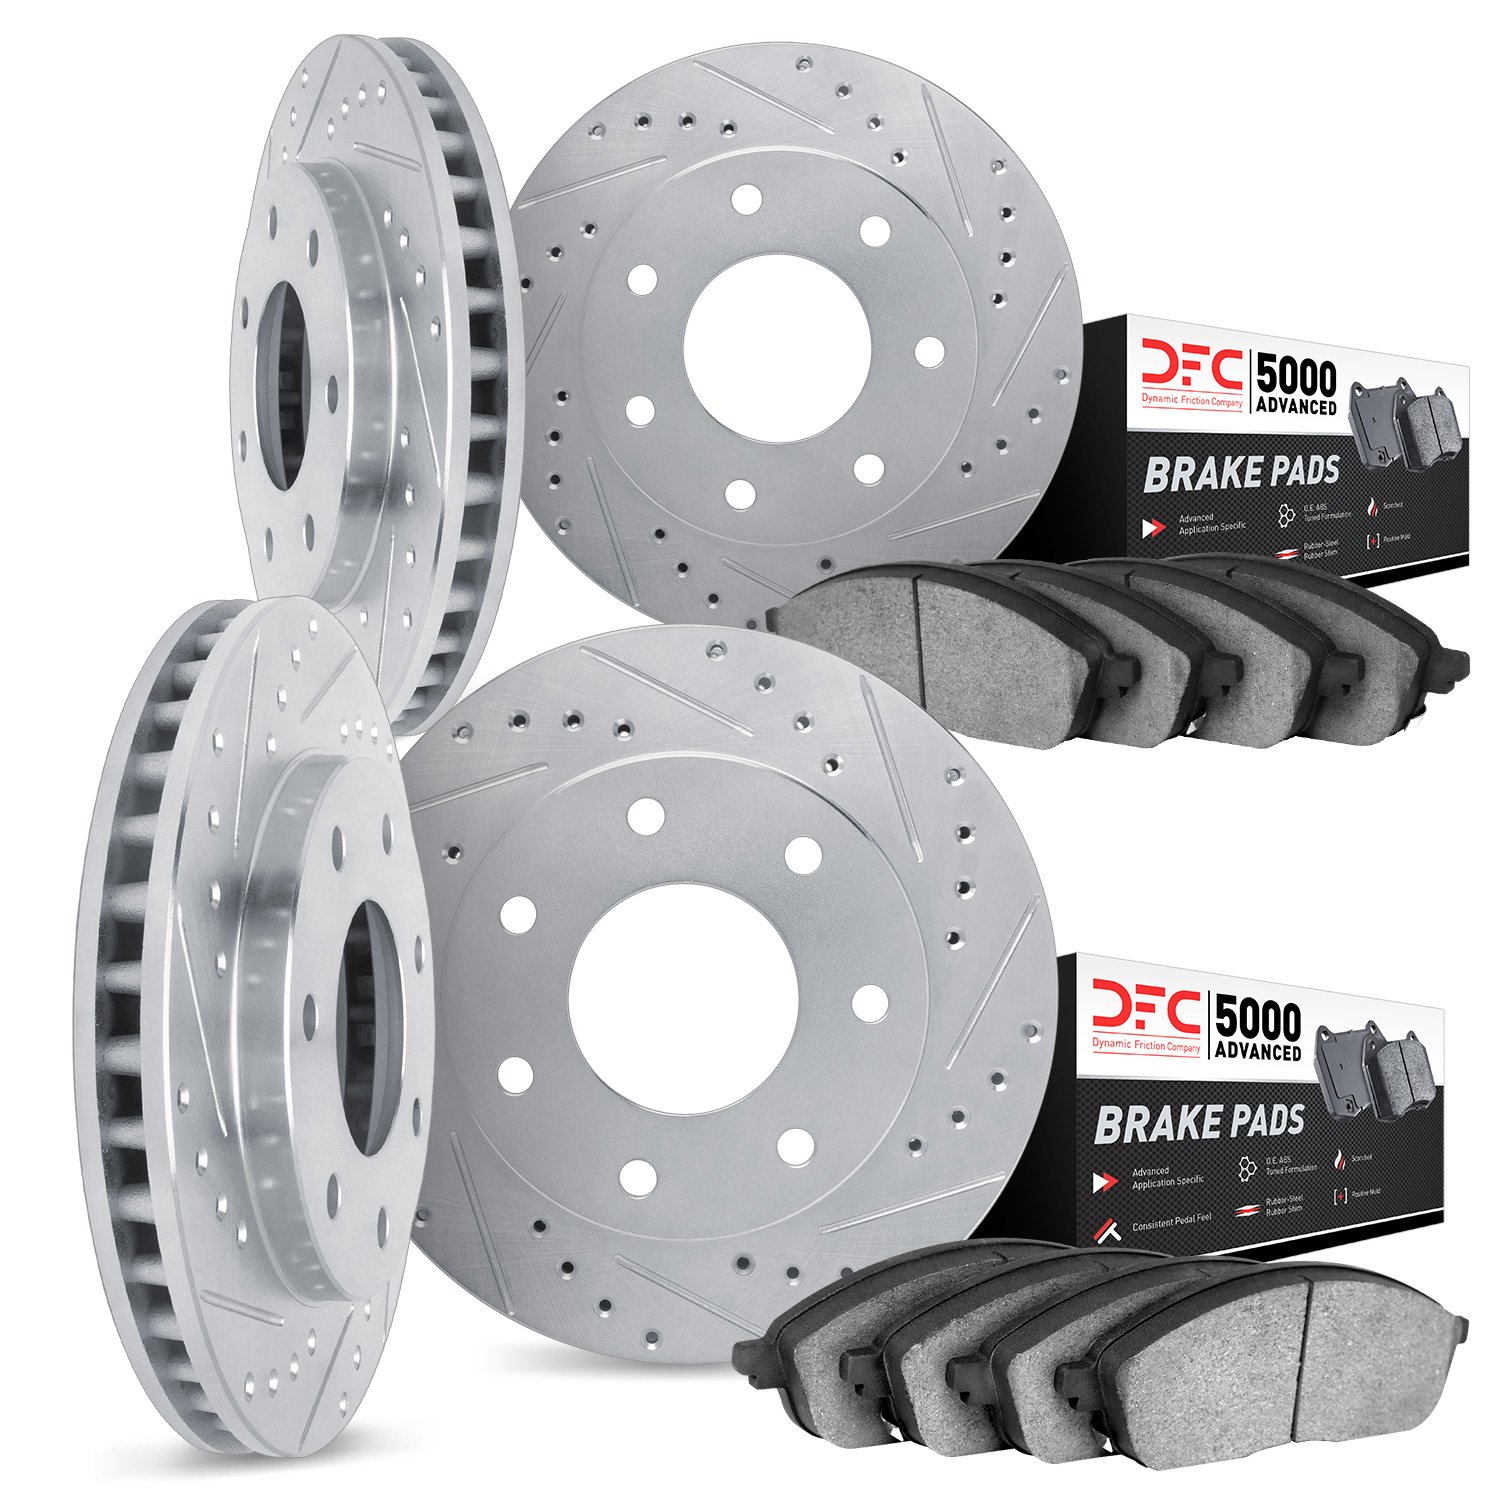 7504-54353 Drilled/Slotted Brake Rotors w/5000 Advanced Brake Pads Kit [Silver], 2004-2008 Ford/Lincoln/Mercury/Mazda, Position: